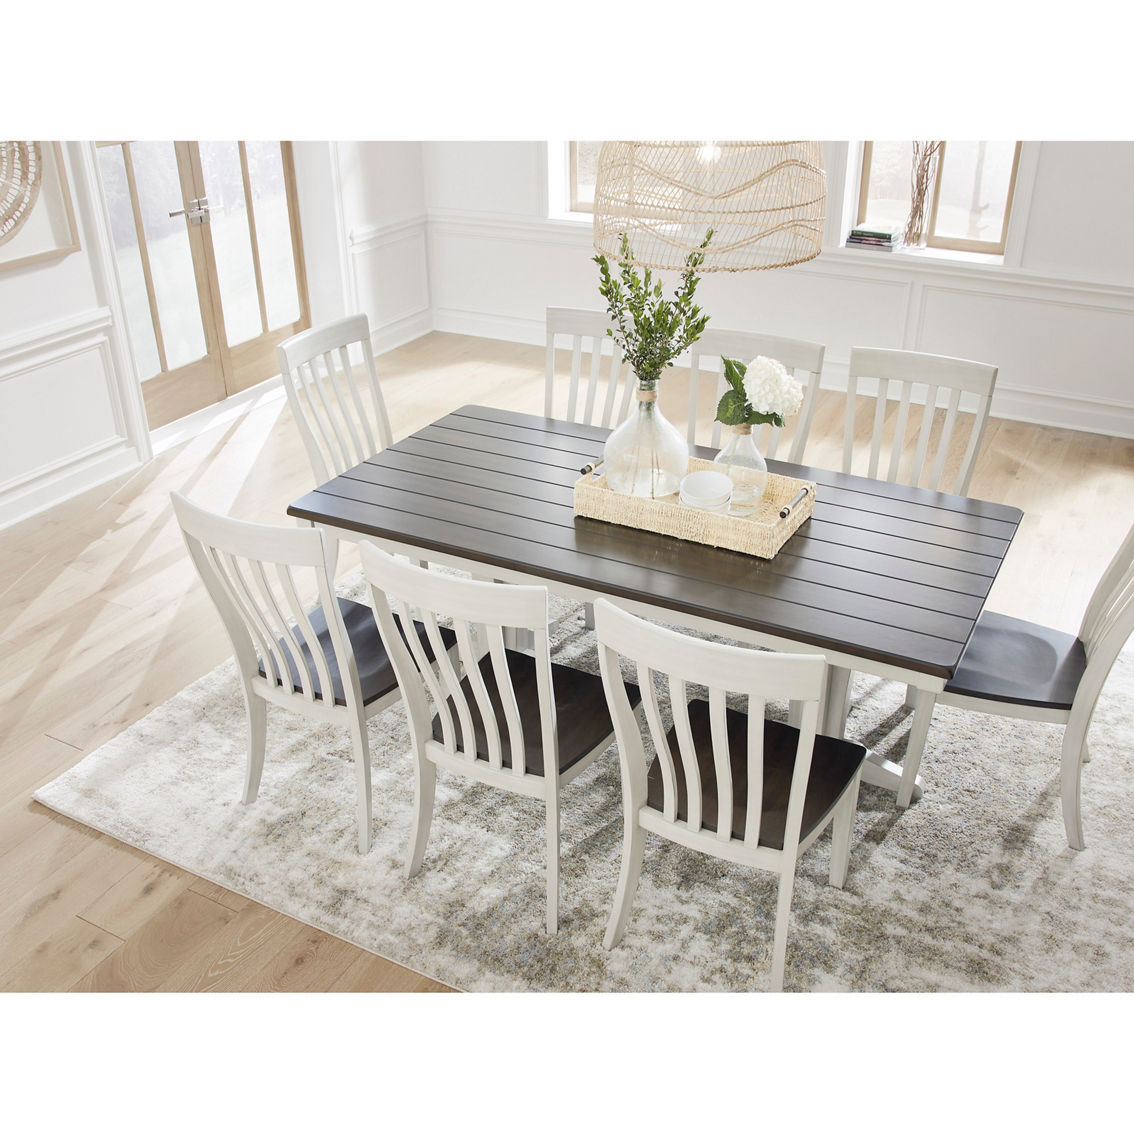 Signature Design by Ashley Darborn 9 pc. Dining Set: Table, 8 Chairs - Image 5 of 9